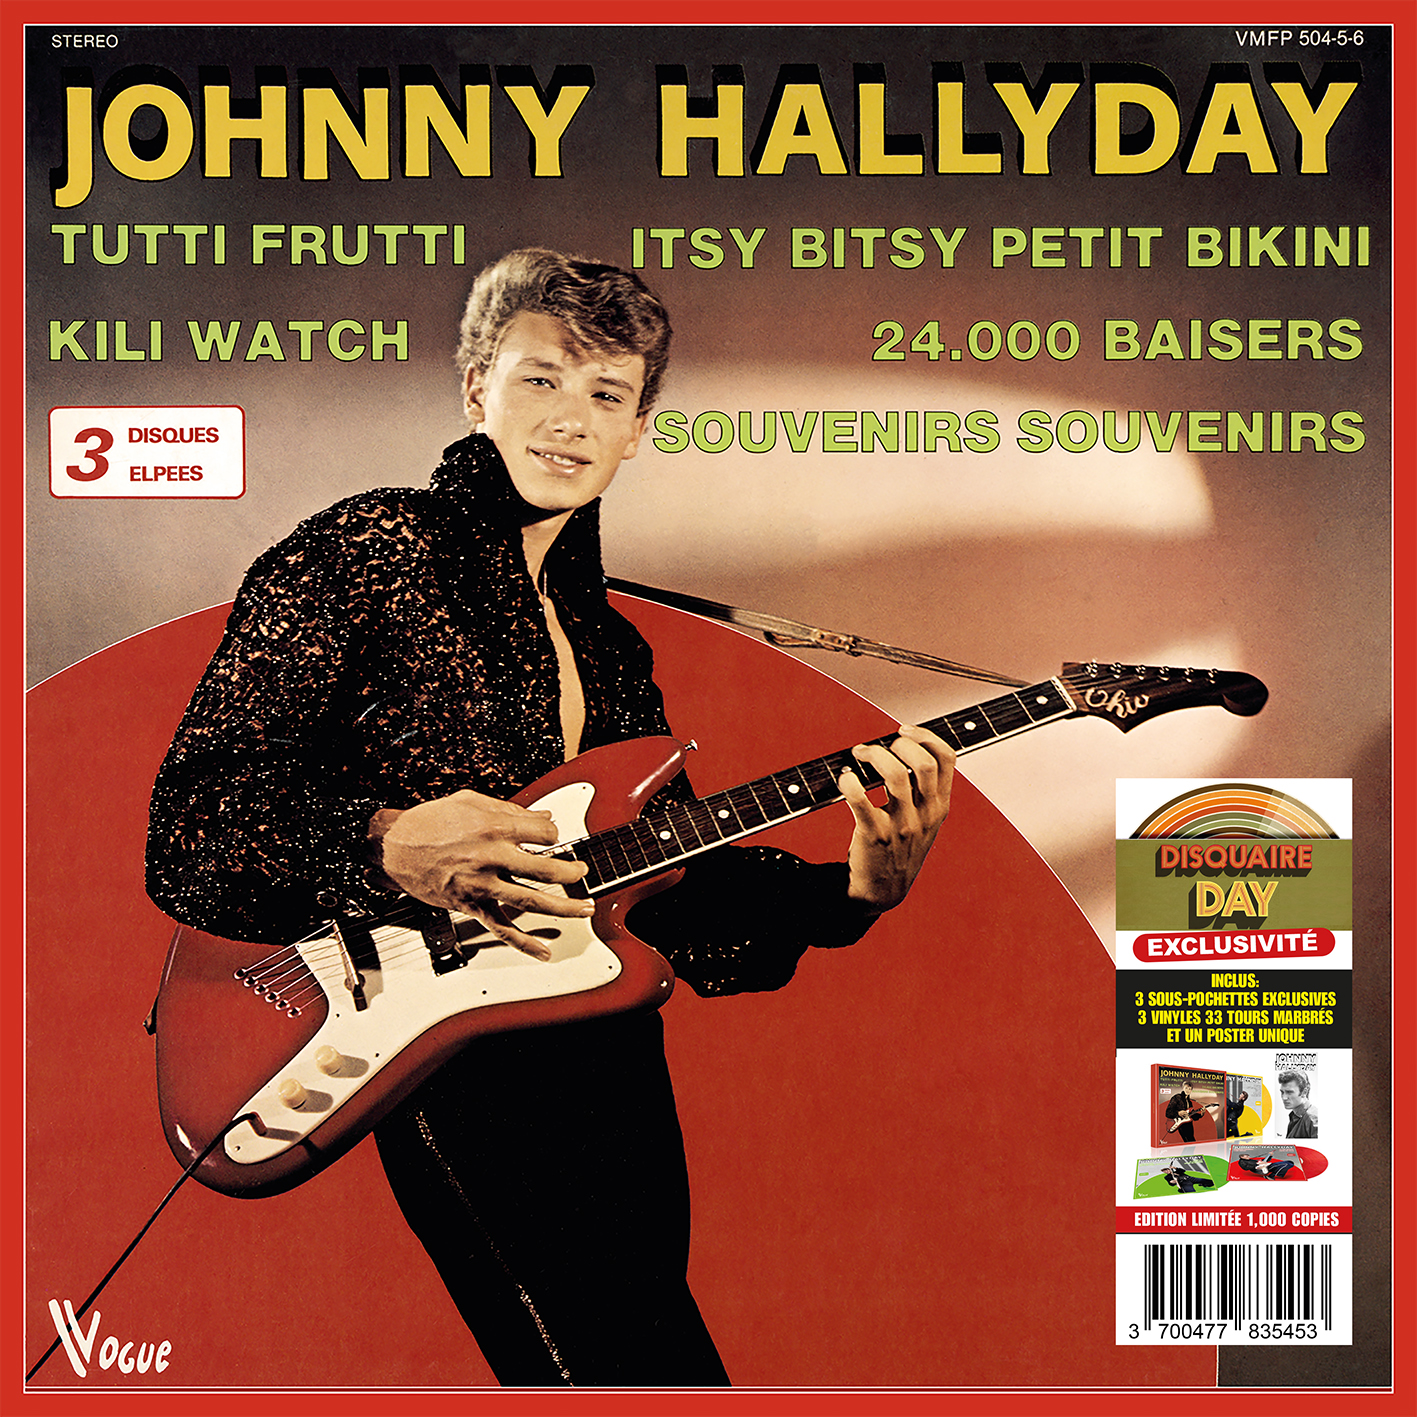 JOHNNY HALLYDAY coffret vinyl collector vogue 1960-1961, 7inch box for sale  on Ultime Music